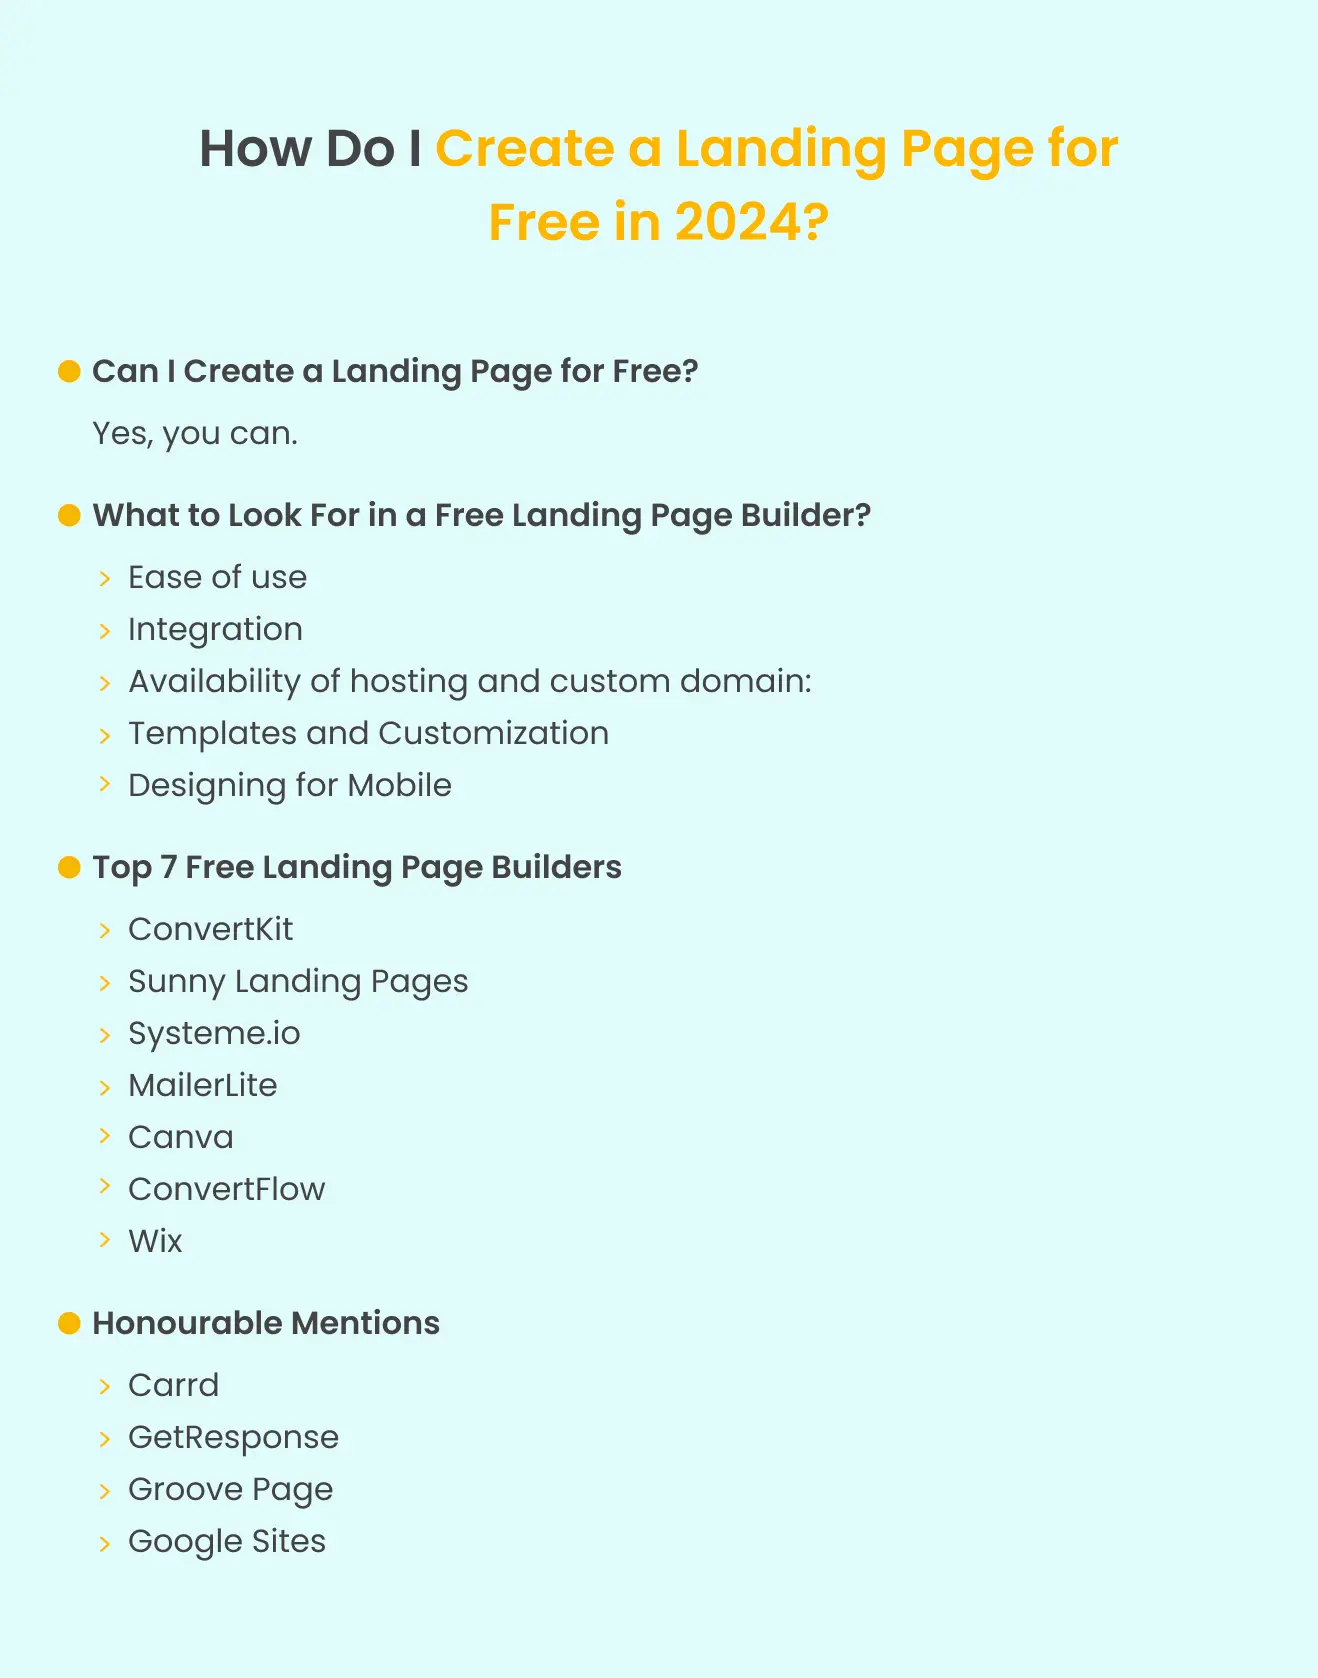 how-to-create-a-free-landing-page-without-website-summary.webp